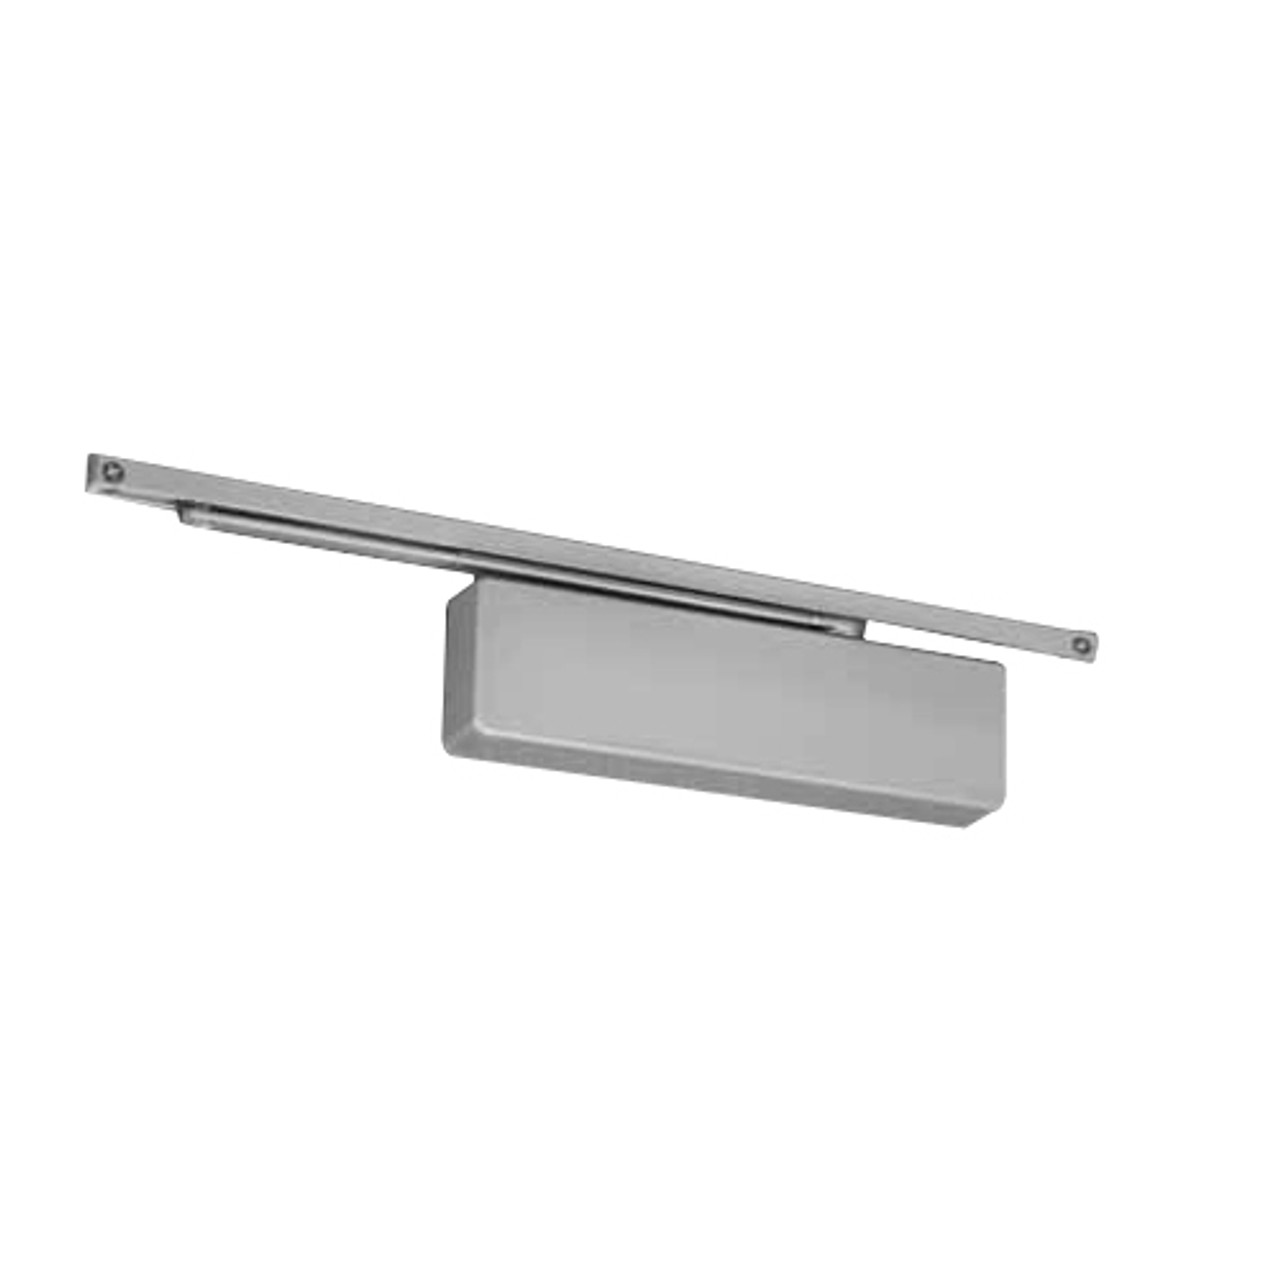 7540STDA-689 Norton 7500 Series Non-Hold Open Institutional Door Closer with Pull Side Low Profile Slide Track in Aluminum Finish